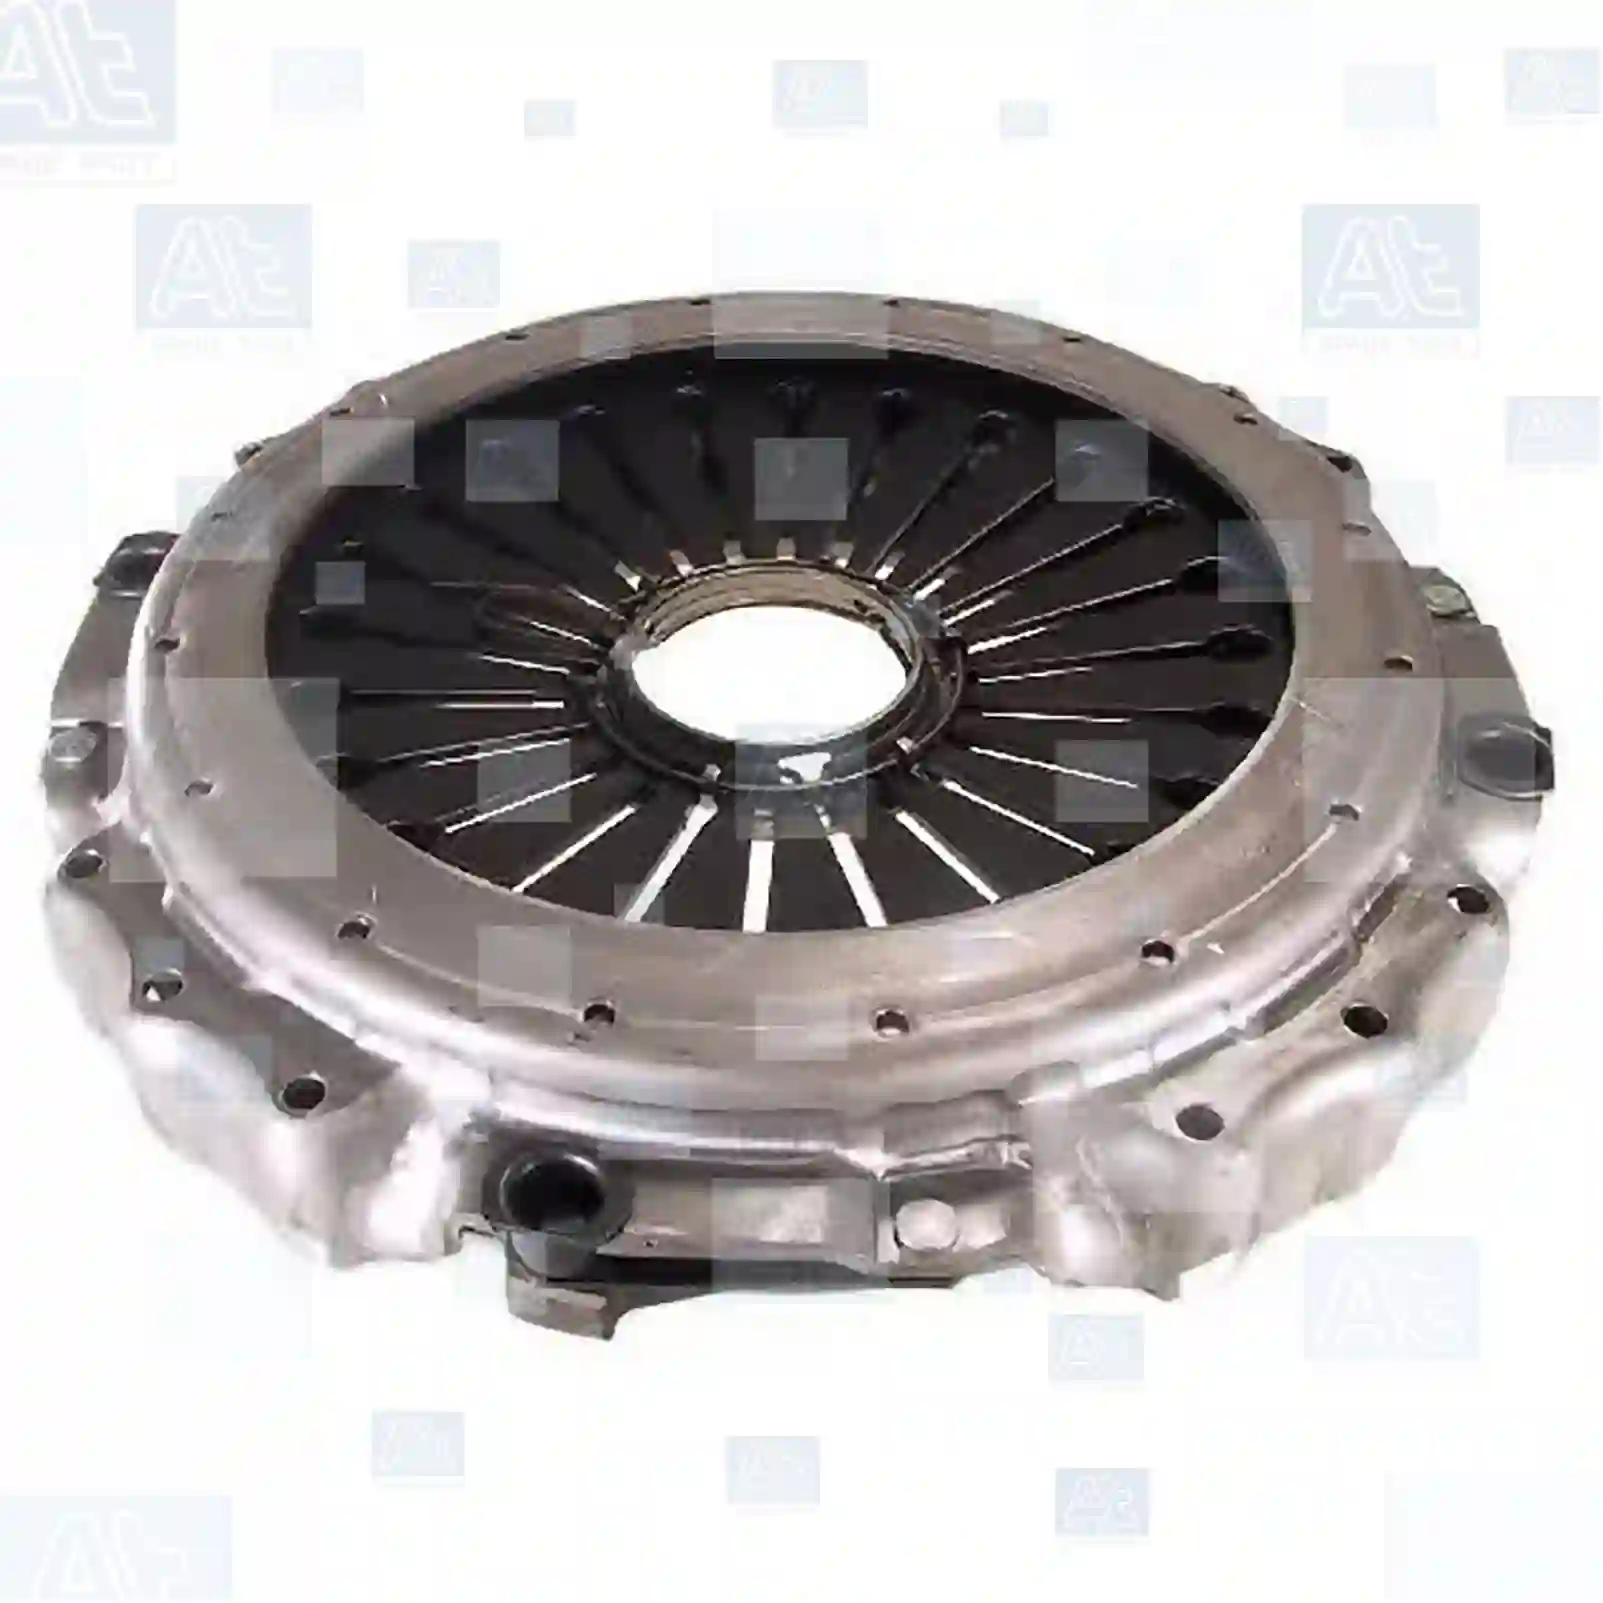 Clutch cover, at no 77722677, oem no: 20257128, 1204205, 1204205A, 1204205R, 1329459, 1329549, 1329549A, 1329549R, 500697757, 312103200A, 42102947, 500697757, 81303050138, 81303050139, 81303050158, 81303050165, 81303050166, 81303050179, 81303050182, 81303050191, 81303050193, 81303050194, 81303059166, 81303059191, 81303059193, 81303059194, N1011009971, 011009971, 81303050158, 81303050191, 81303050193, 81303059193, 8383292000, 8383318000 At Spare Part | Engine, Accelerator Pedal, Camshaft, Connecting Rod, Crankcase, Crankshaft, Cylinder Head, Engine Suspension Mountings, Exhaust Manifold, Exhaust Gas Recirculation, Filter Kits, Flywheel Housing, General Overhaul Kits, Engine, Intake Manifold, Oil Cleaner, Oil Cooler, Oil Filter, Oil Pump, Oil Sump, Piston & Liner, Sensor & Switch, Timing Case, Turbocharger, Cooling System, Belt Tensioner, Coolant Filter, Coolant Pipe, Corrosion Prevention Agent, Drive, Expansion Tank, Fan, Intercooler, Monitors & Gauges, Radiator, Thermostat, V-Belt / Timing belt, Water Pump, Fuel System, Electronical Injector Unit, Feed Pump, Fuel Filter, cpl., Fuel Gauge Sender,  Fuel Line, Fuel Pump, Fuel Tank, Injection Line Kit, Injection Pump, Exhaust System, Clutch & Pedal, Gearbox, Propeller Shaft, Axles, Brake System, Hubs & Wheels, Suspension, Leaf Spring, Universal Parts / Accessories, Steering, Electrical System, Cabin Clutch cover, at no 77722677, oem no: 20257128, 1204205, 1204205A, 1204205R, 1329459, 1329549, 1329549A, 1329549R, 500697757, 312103200A, 42102947, 500697757, 81303050138, 81303050139, 81303050158, 81303050165, 81303050166, 81303050179, 81303050182, 81303050191, 81303050193, 81303050194, 81303059166, 81303059191, 81303059193, 81303059194, N1011009971, 011009971, 81303050158, 81303050191, 81303050193, 81303059193, 8383292000, 8383318000 At Spare Part | Engine, Accelerator Pedal, Camshaft, Connecting Rod, Crankcase, Crankshaft, Cylinder Head, Engine Suspension Mountings, Exhaust Manifold, Exhaust Gas Recirculation, Filter Kits, Flywheel Housing, General Overhaul Kits, Engine, Intake Manifold, Oil Cleaner, Oil Cooler, Oil Filter, Oil Pump, Oil Sump, Piston & Liner, Sensor & Switch, Timing Case, Turbocharger, Cooling System, Belt Tensioner, Coolant Filter, Coolant Pipe, Corrosion Prevention Agent, Drive, Expansion Tank, Fan, Intercooler, Monitors & Gauges, Radiator, Thermostat, V-Belt / Timing belt, Water Pump, Fuel System, Electronical Injector Unit, Feed Pump, Fuel Filter, cpl., Fuel Gauge Sender,  Fuel Line, Fuel Pump, Fuel Tank, Injection Line Kit, Injection Pump, Exhaust System, Clutch & Pedal, Gearbox, Propeller Shaft, Axles, Brake System, Hubs & Wheels, Suspension, Leaf Spring, Universal Parts / Accessories, Steering, Electrical System, Cabin